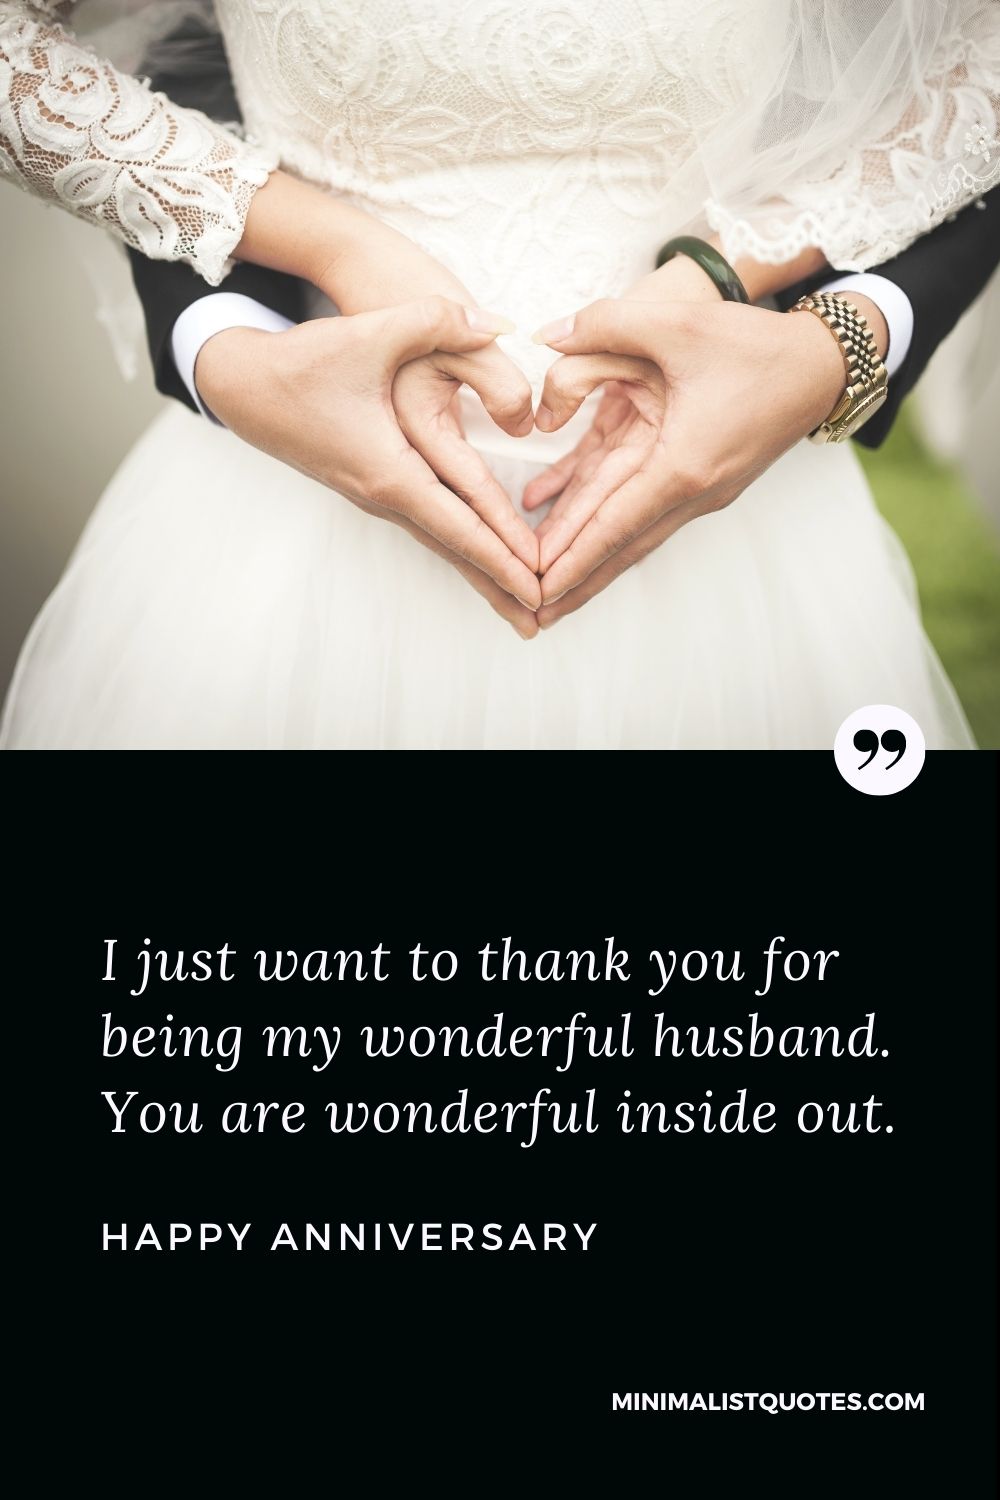 Happy Anniversary - I just want to thank you for being my wonderful husband. You are wonderful inside out.